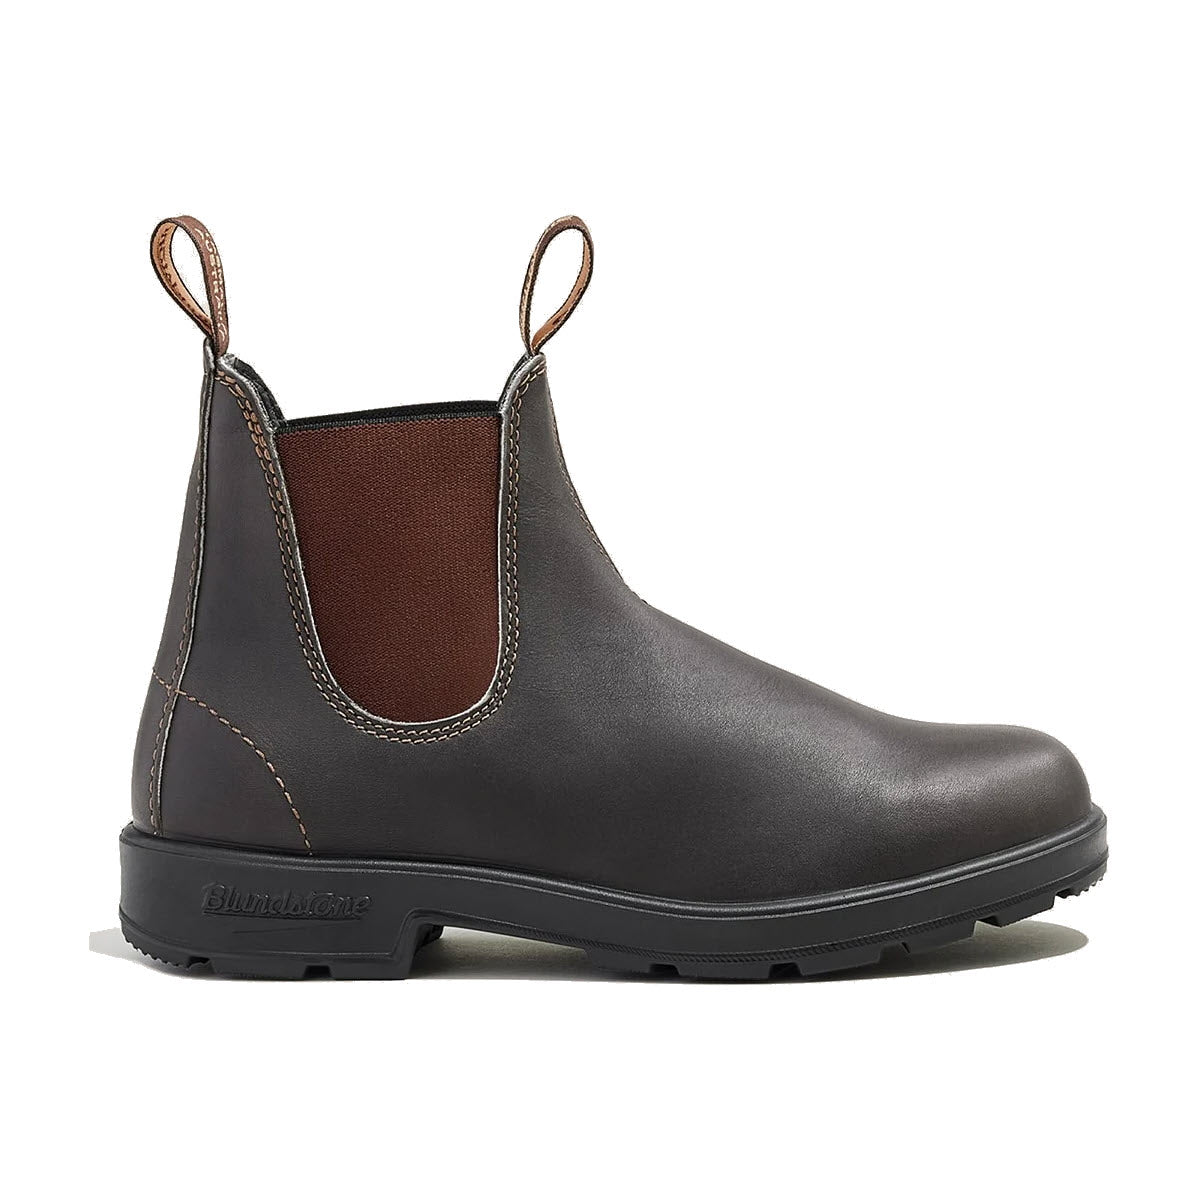 A single Blundstone 172 Chelsea steel toe work boot with brown elastic side panels and pull loops on a white background.